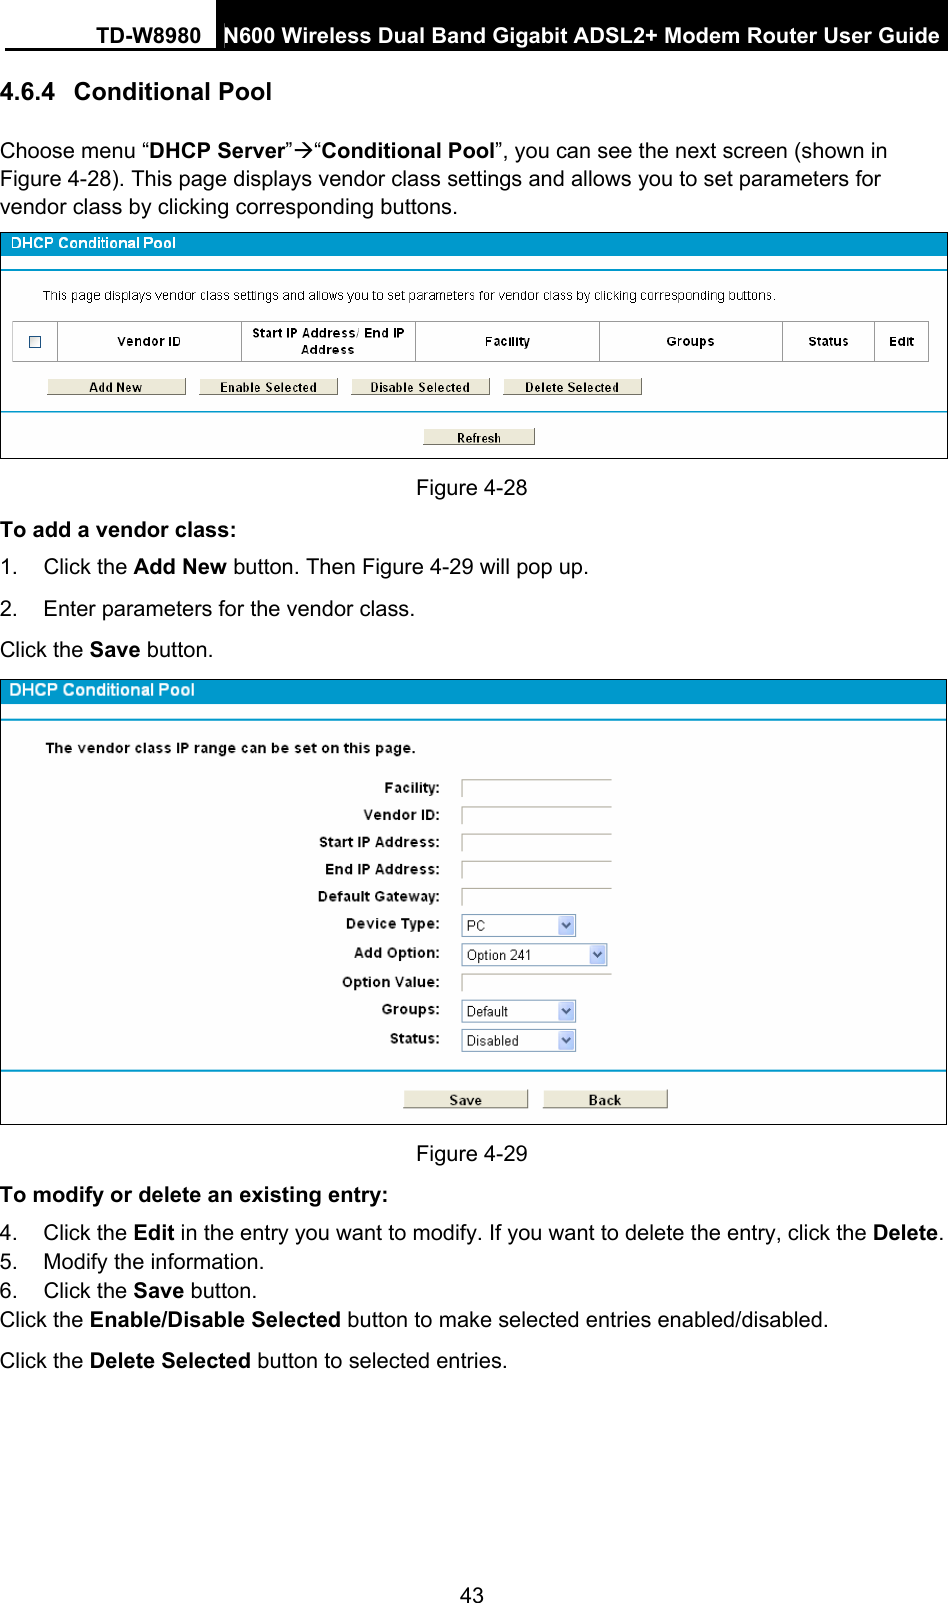 TD-W8980  N600 Wireless Dual Band Gigabit ADSL2+ Modem Router User Guide 43 4.6.4  Conditional Pool Choose menu “DHCP Server”Æ“Conditional Pool”, you can see the next screen (shown in Figure 4-28). This page displays vendor class settings and allows you to set parameters for vendor class by clicking corresponding buttons.  Figure 4-28 To add a vendor class: 1. Click the Add New button. Then Figure 4-29 will pop up. 2.  Enter parameters for the vendor class.   Click the Save button.  Figure 4-29 To modify or delete an existing entry: 4. Click the Edit in the entry you want to modify. If you want to delete the entry, click the Delete. 5.  Modify the information.   6. Click the Save button. Click the Enable/Disable Selected button to make selected entries enabled/disabled. Click the Delete Selected button to selected entries.   